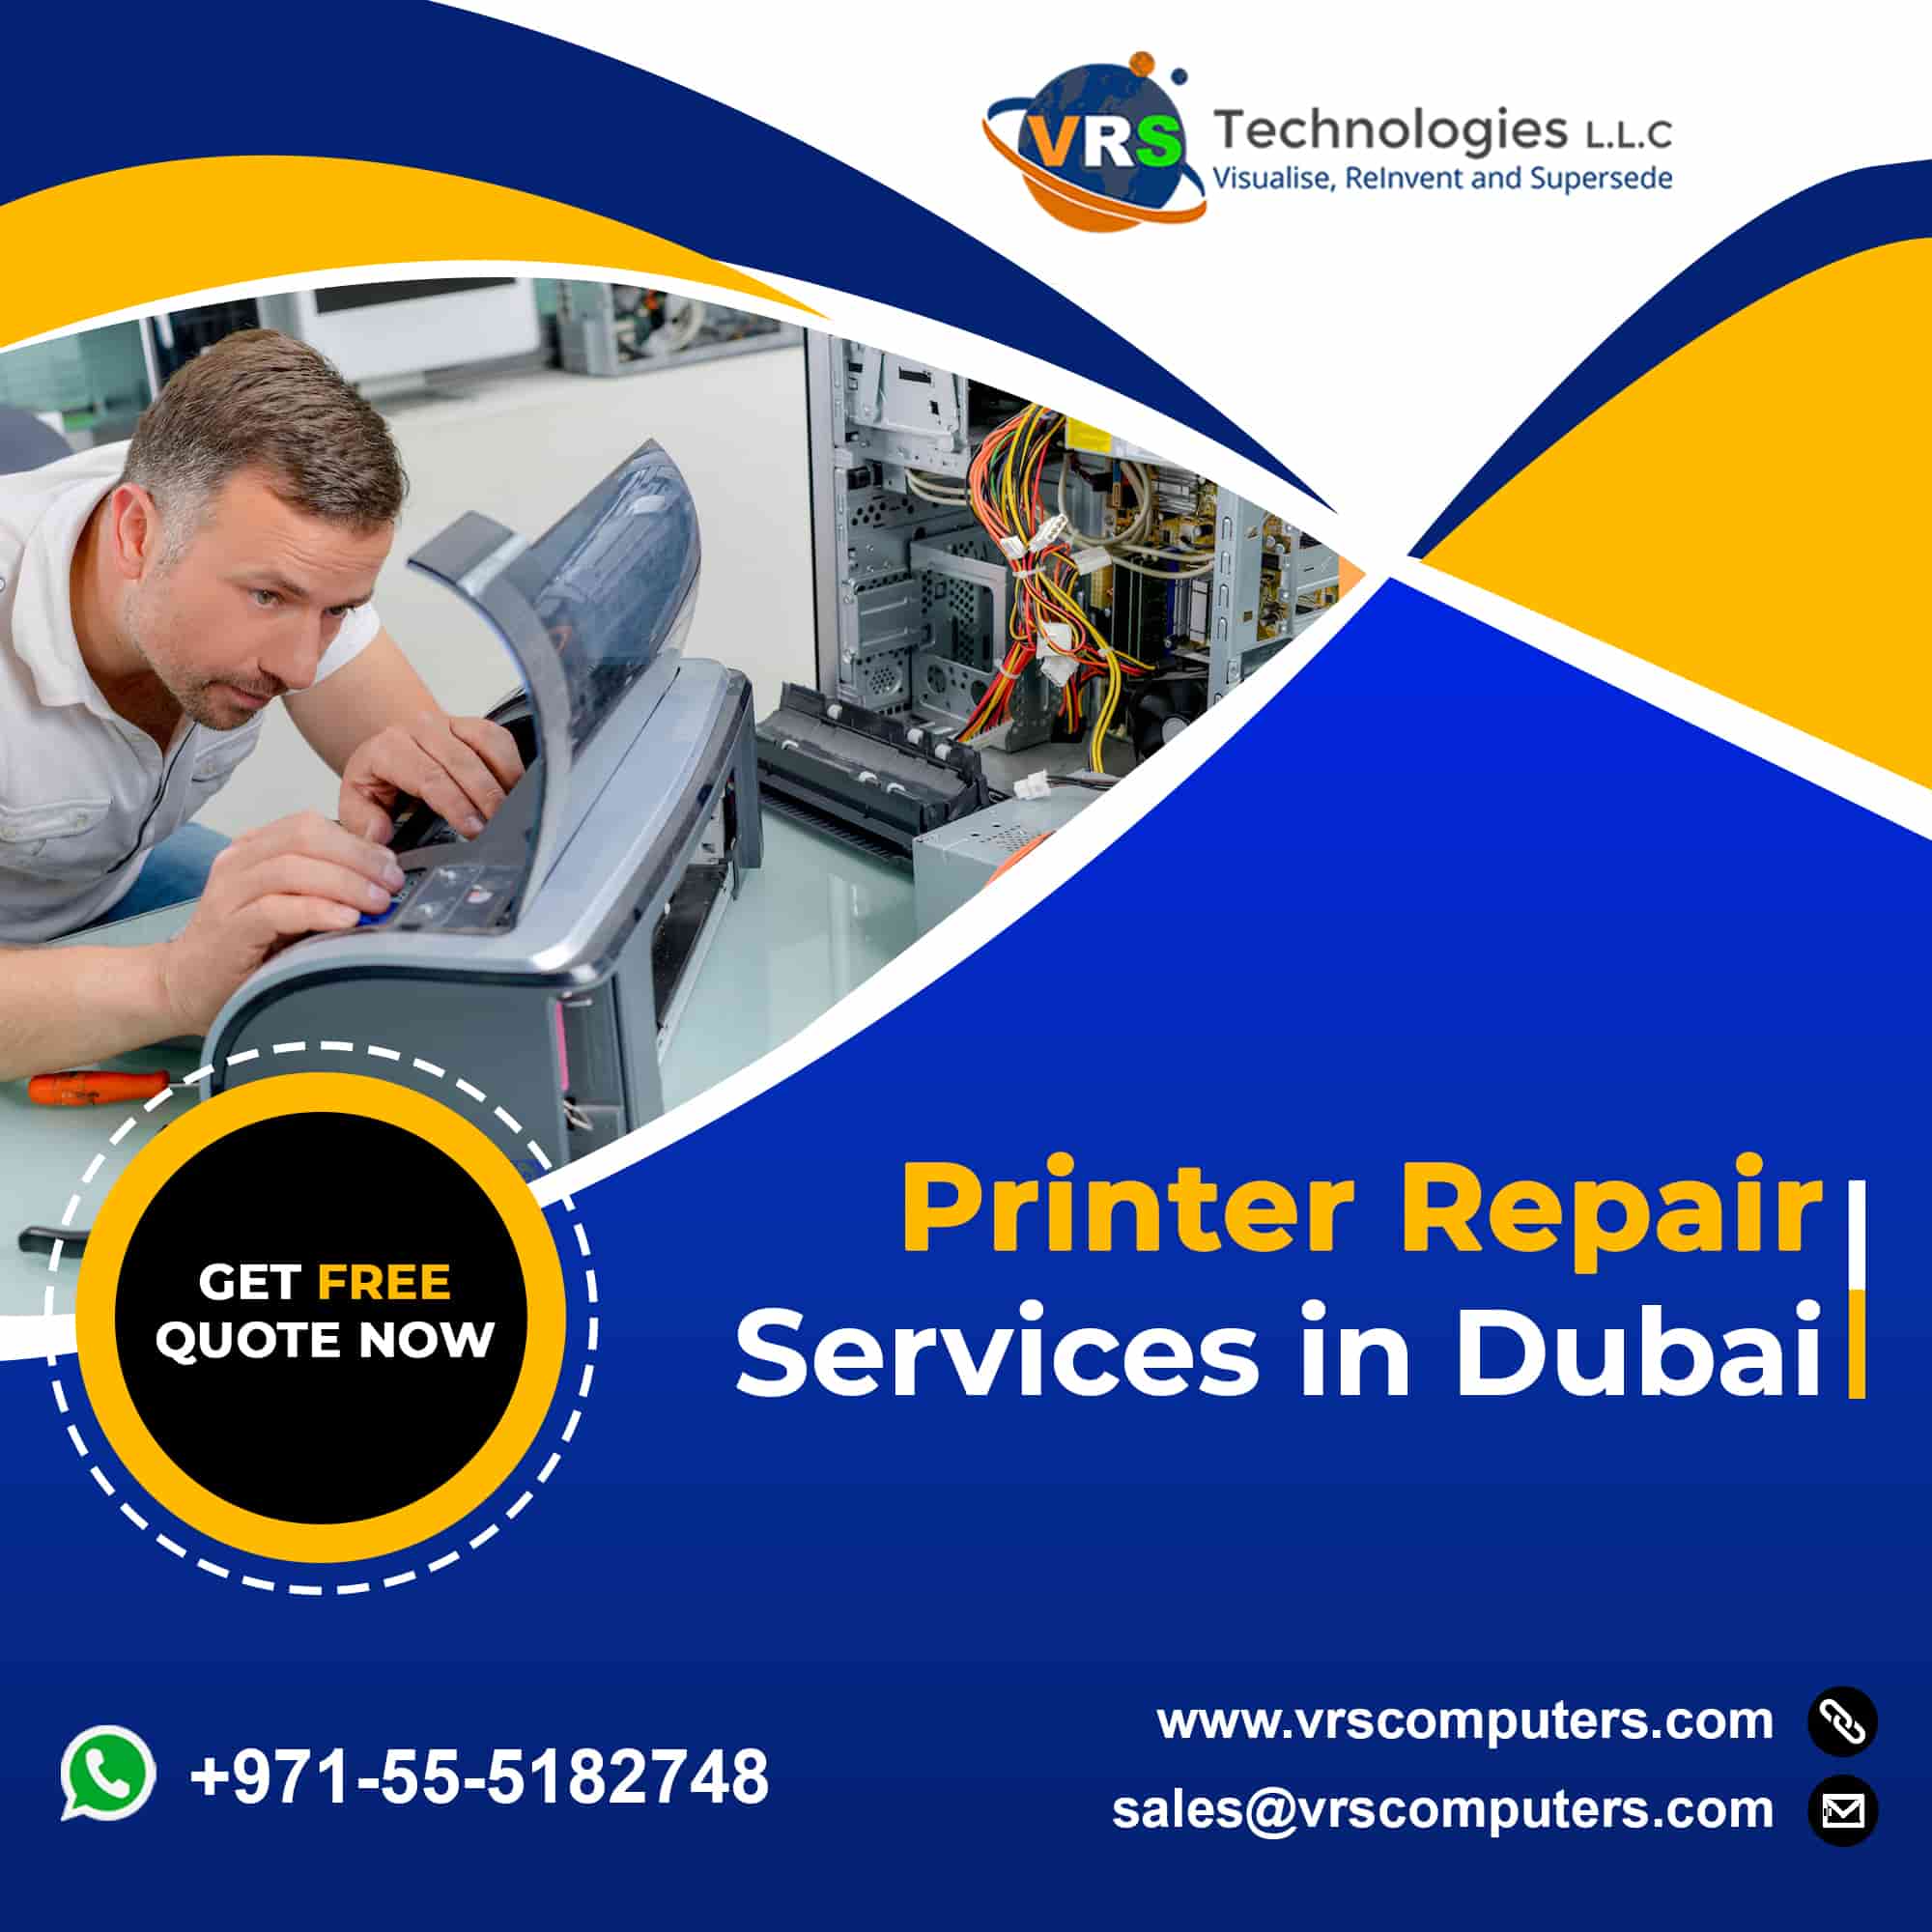 Common Printer Problems And How To Fix Them In Dubai